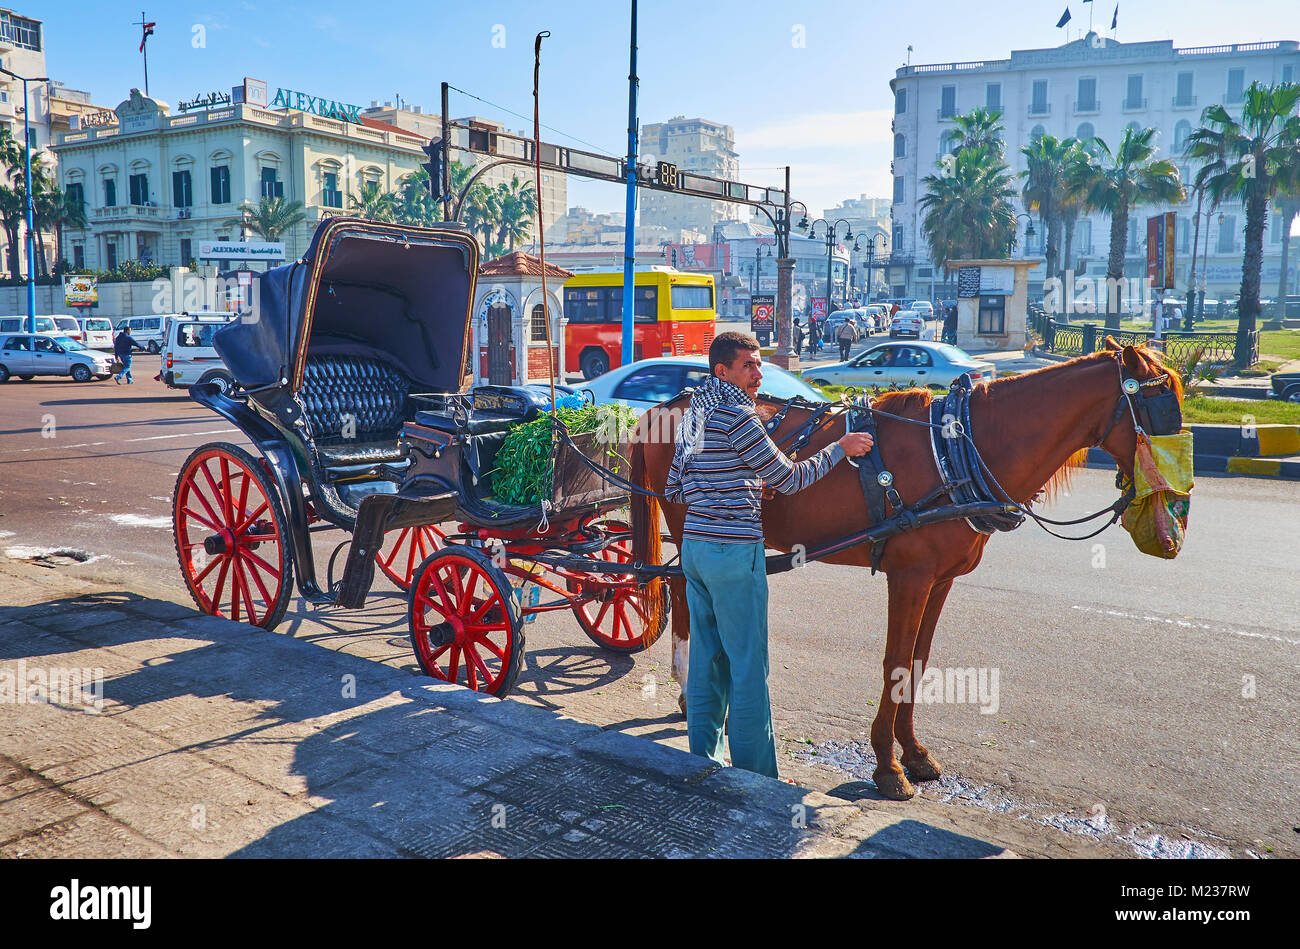 ALEXANDRIA, EGYPT - DECEMBER 18, 2017: The perfect way to relax and enjoy the city is to take a horse carriage and ride along the Corniche embankment, Stock Photo